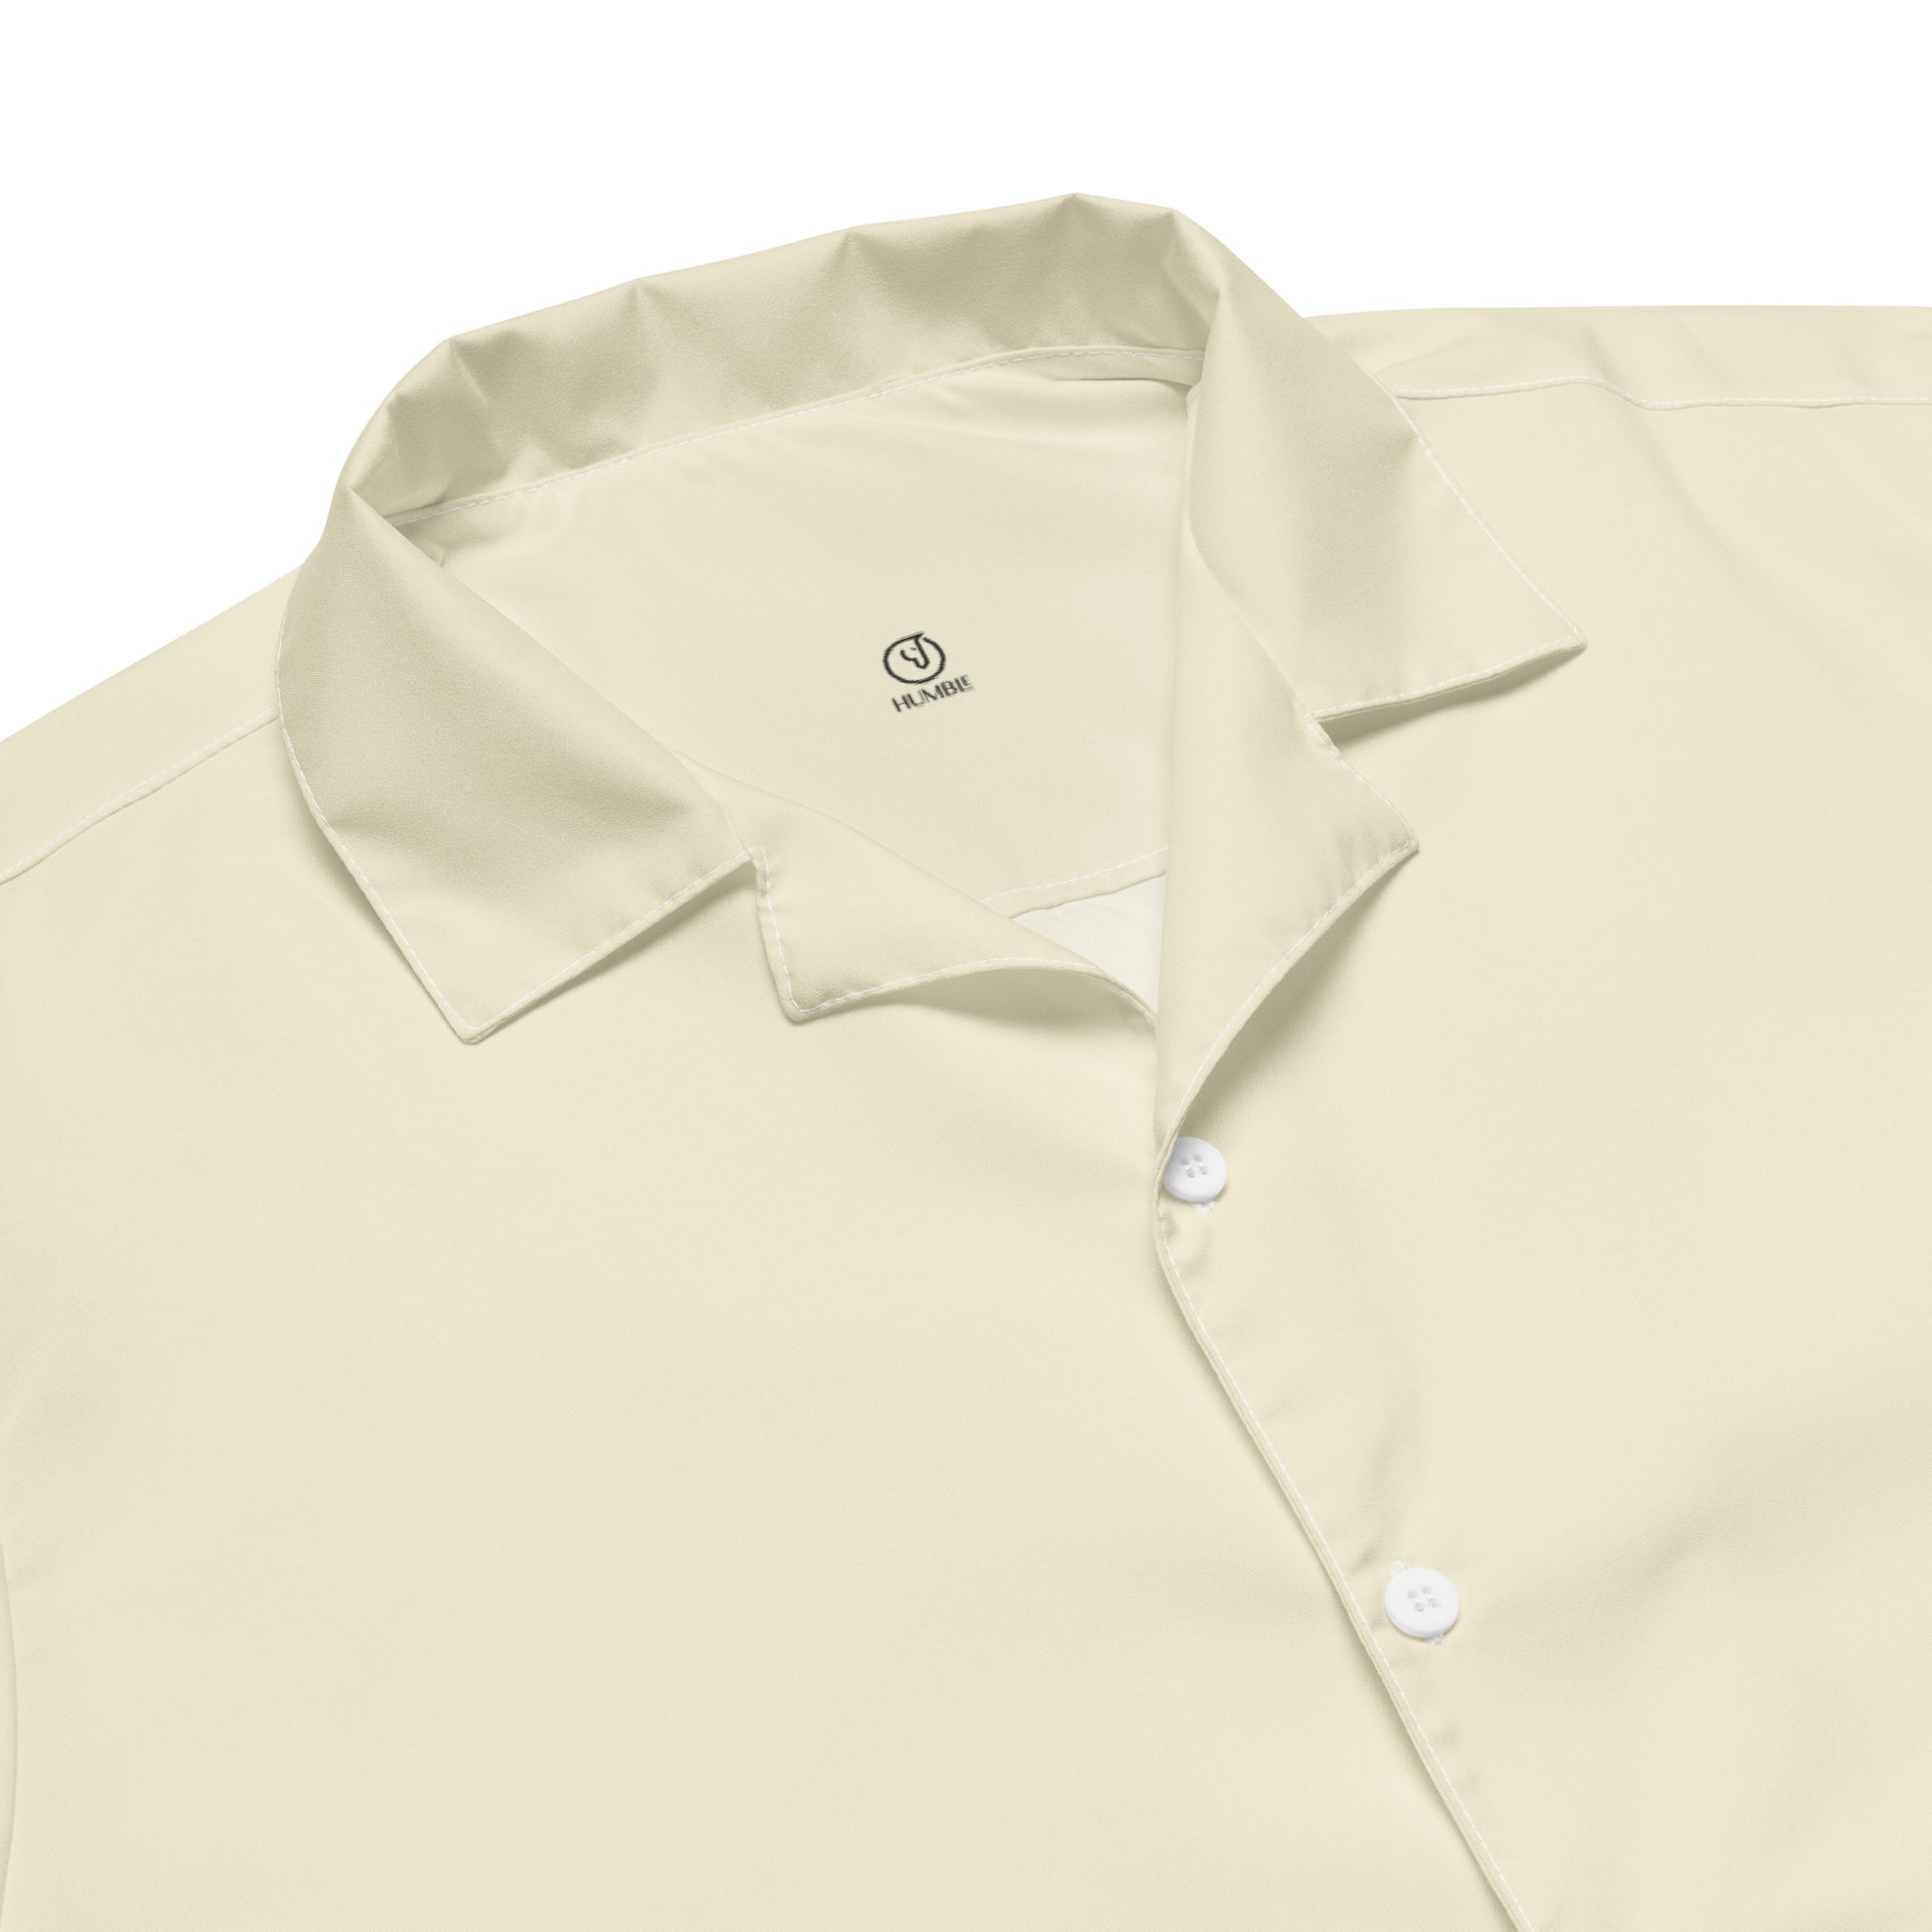 Humble Sportswear, men's lightweight, breathable, anti-sweat neutral Color Match button shirt 